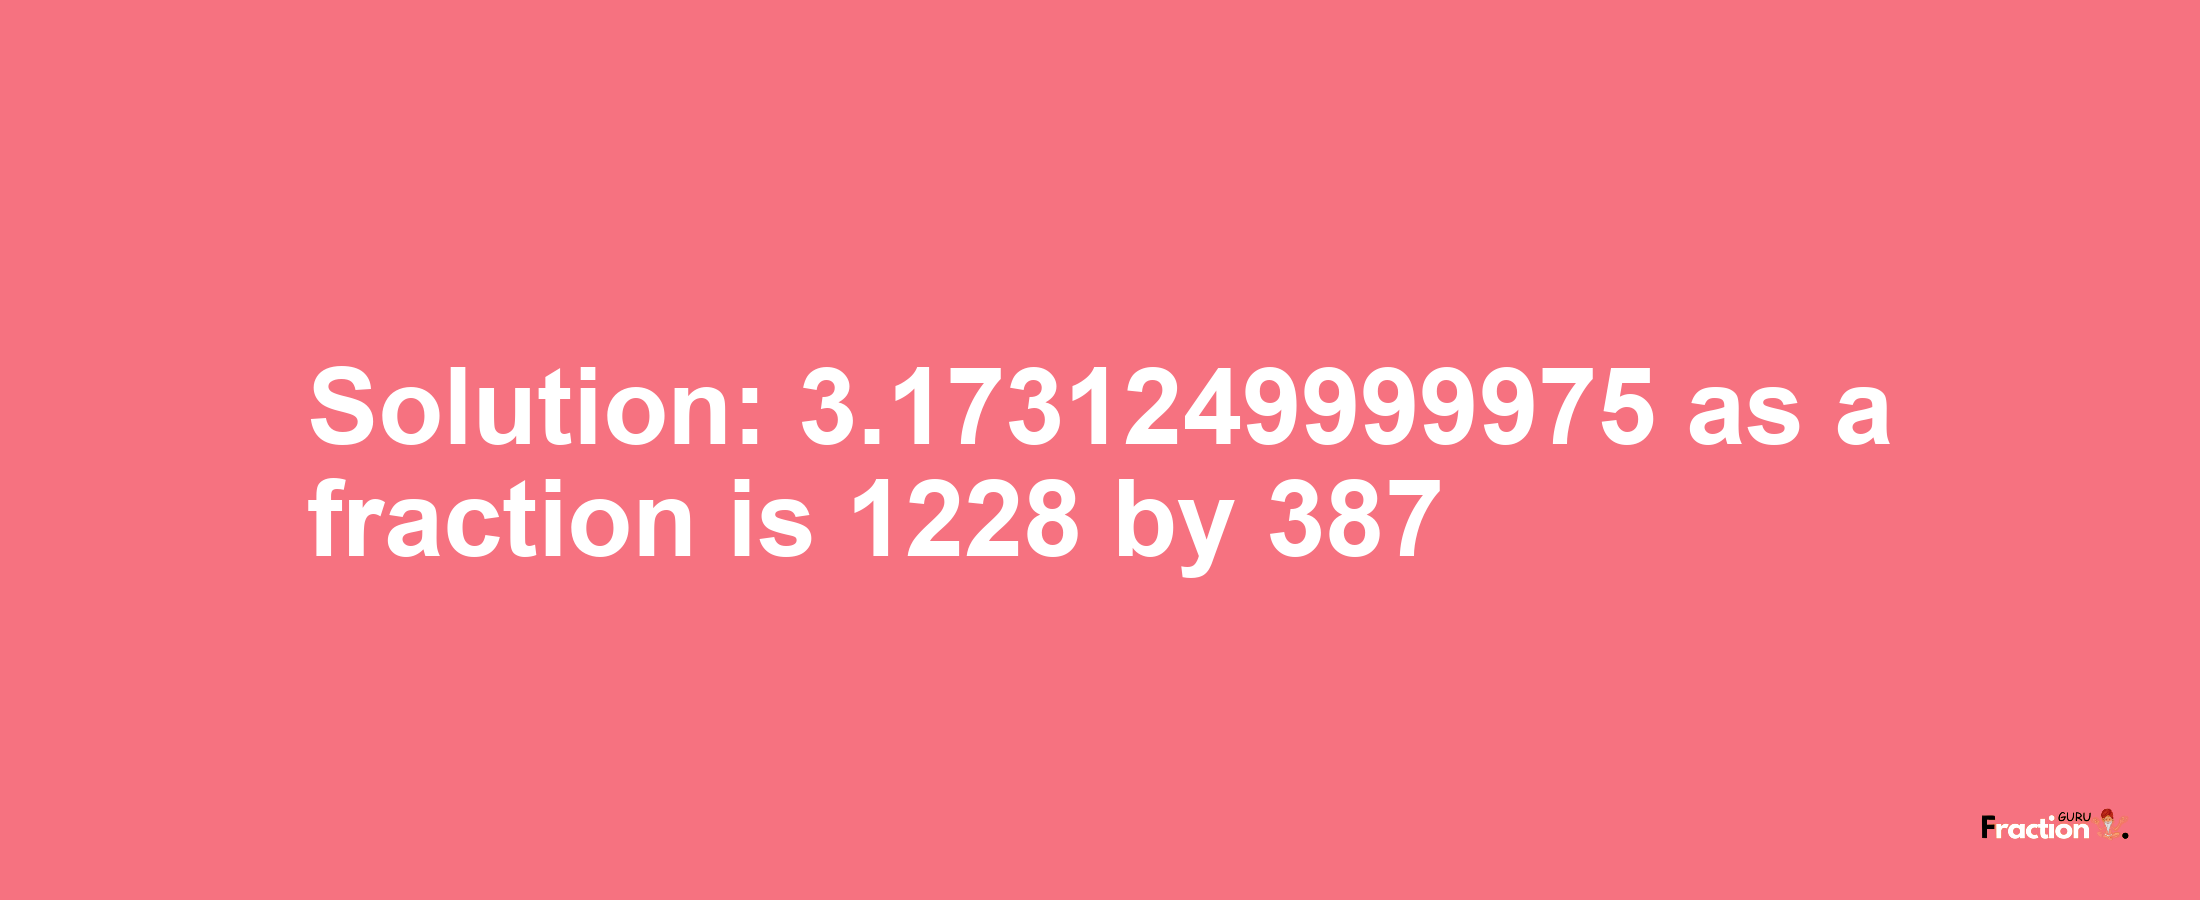 Solution:3.1731249999975 as a fraction is 1228/387